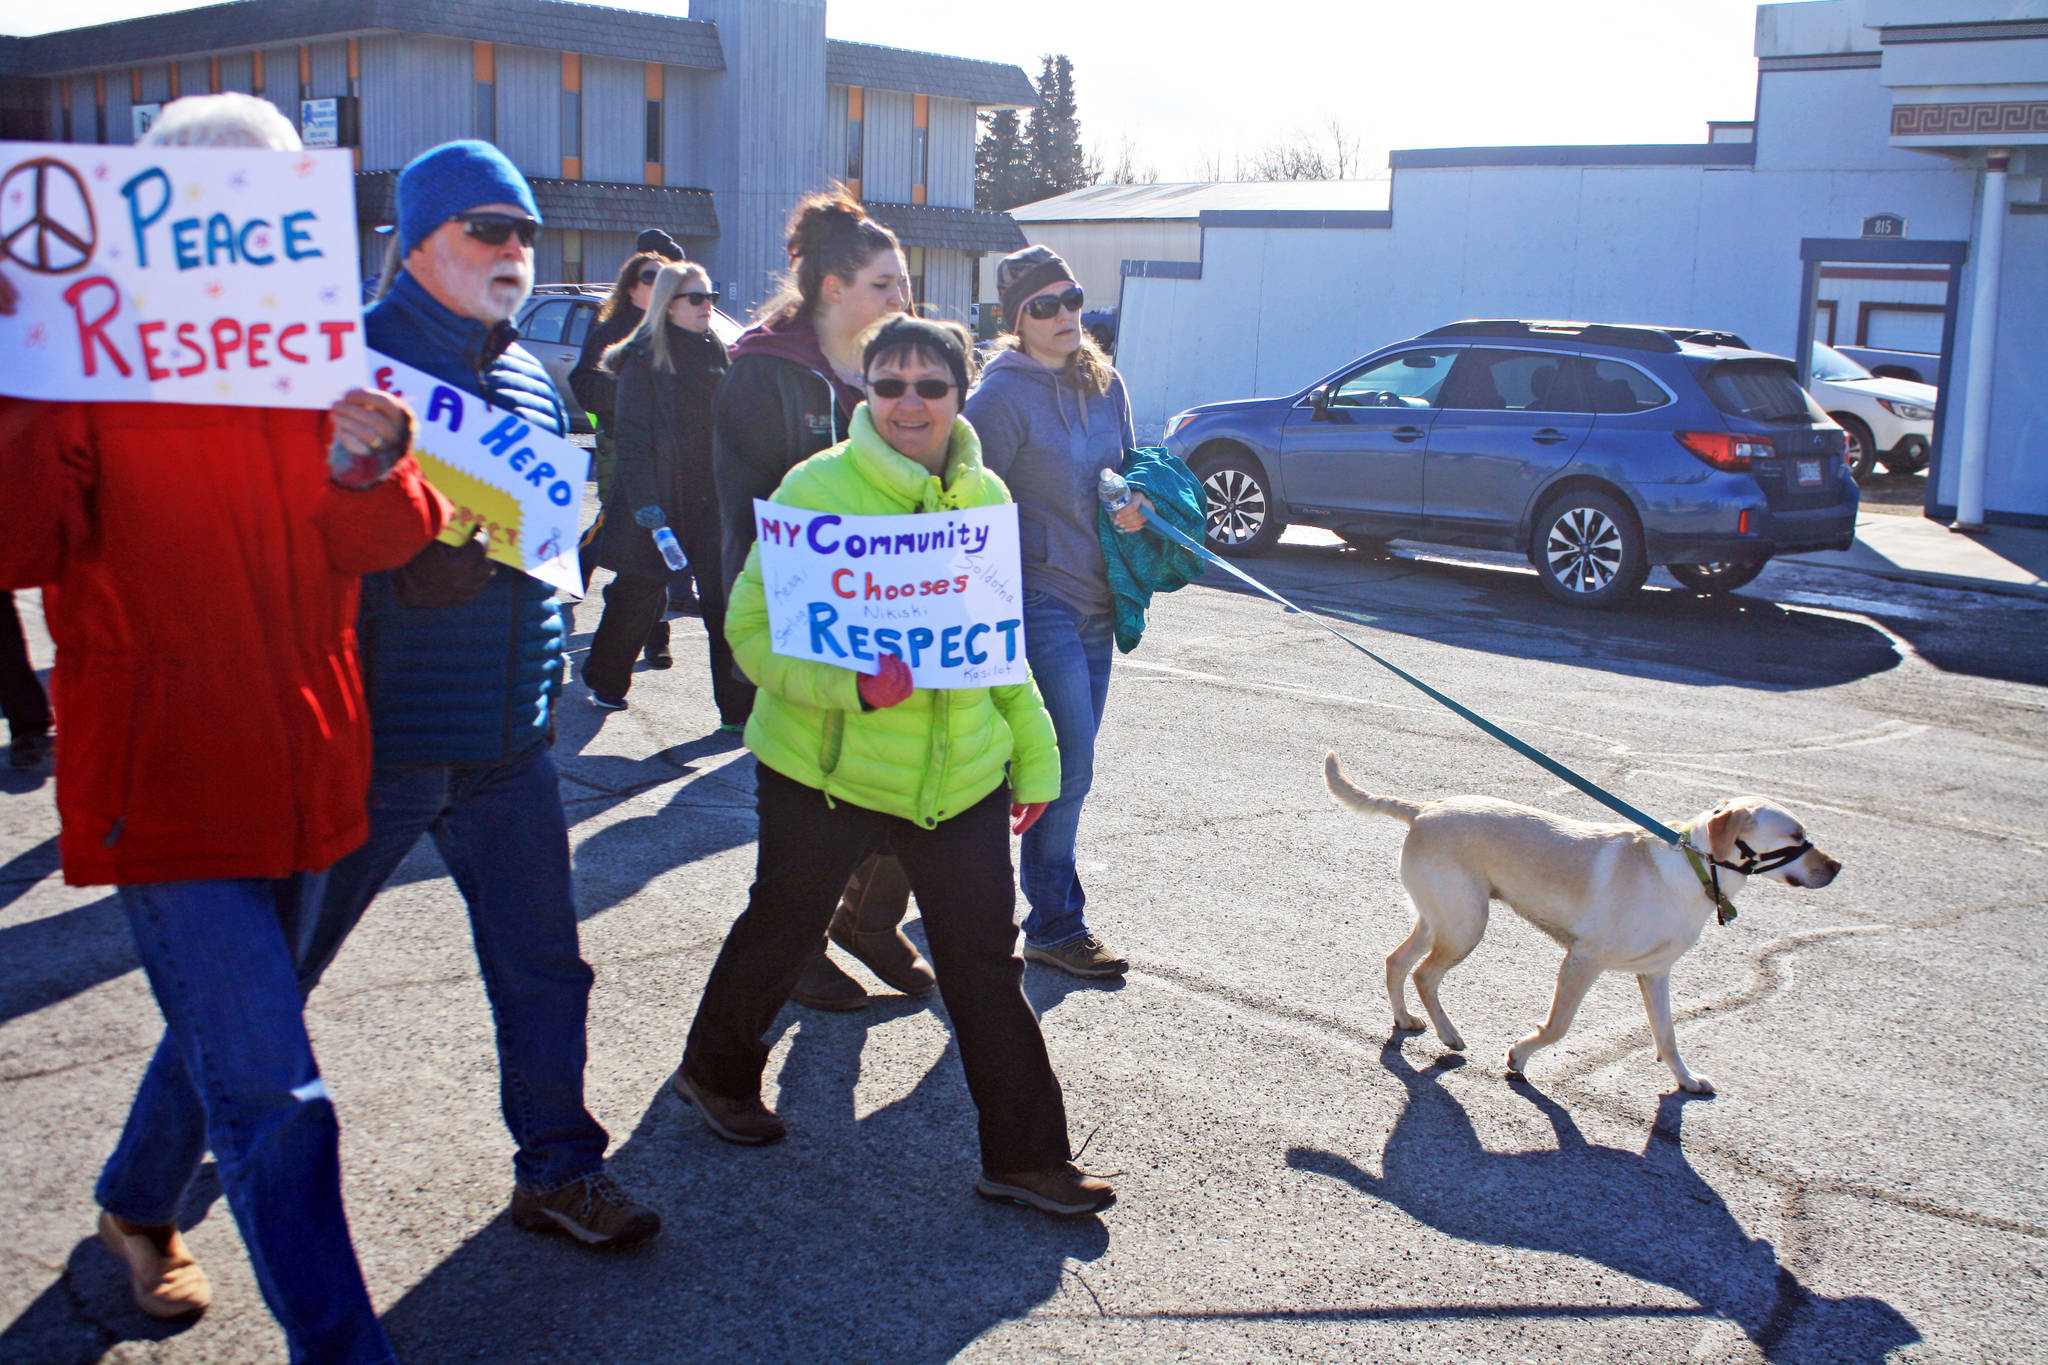 A dog leads the way during the Alaskans Choose Respect Awareness Event, hosted by the LeeShore Center, on Wednesday, March 28 in Kenai. The march aimed to draw attention to the issue of sexual assault and domestic violence. (Photo by Erin Thompson/Peninsula Clarion)